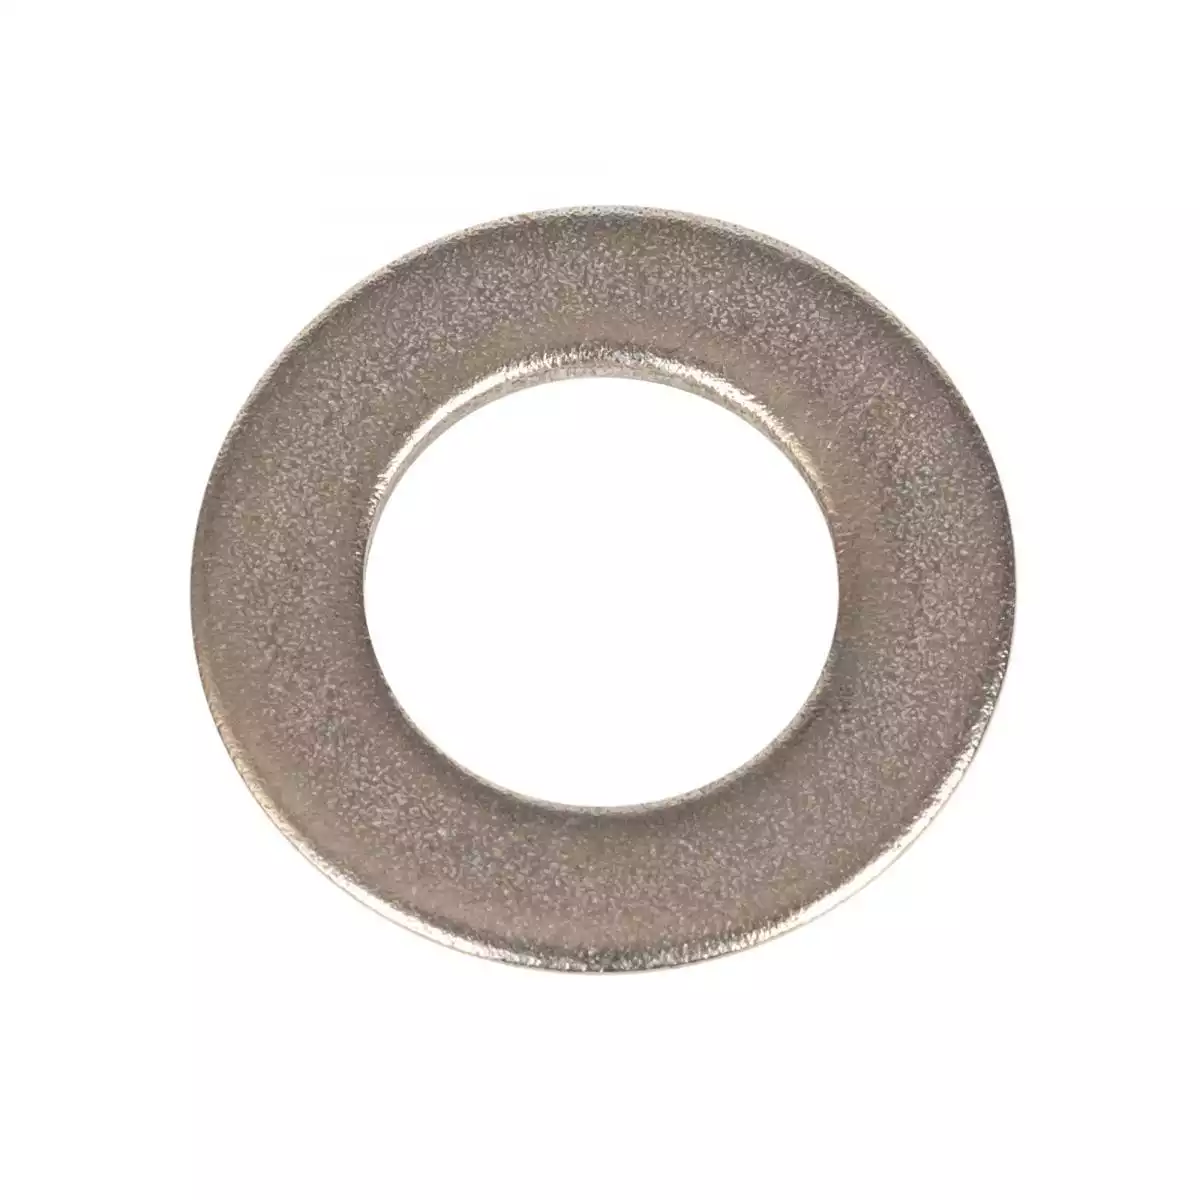 ASTM F436 Washer, SS316, 7/8 Inch, Flat Type